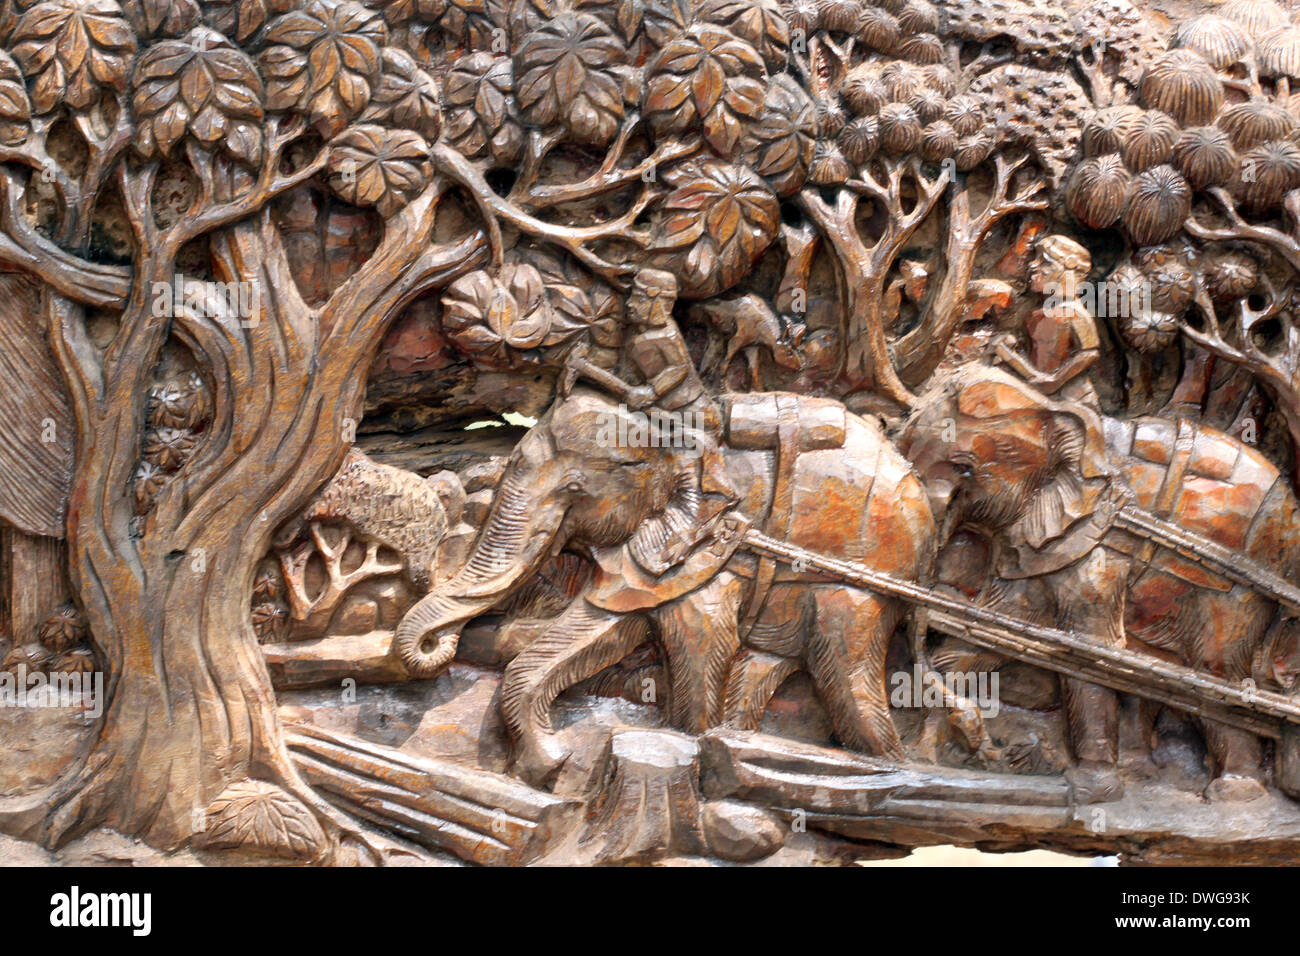 Motifs carved from wood of elephant. Stock Photo